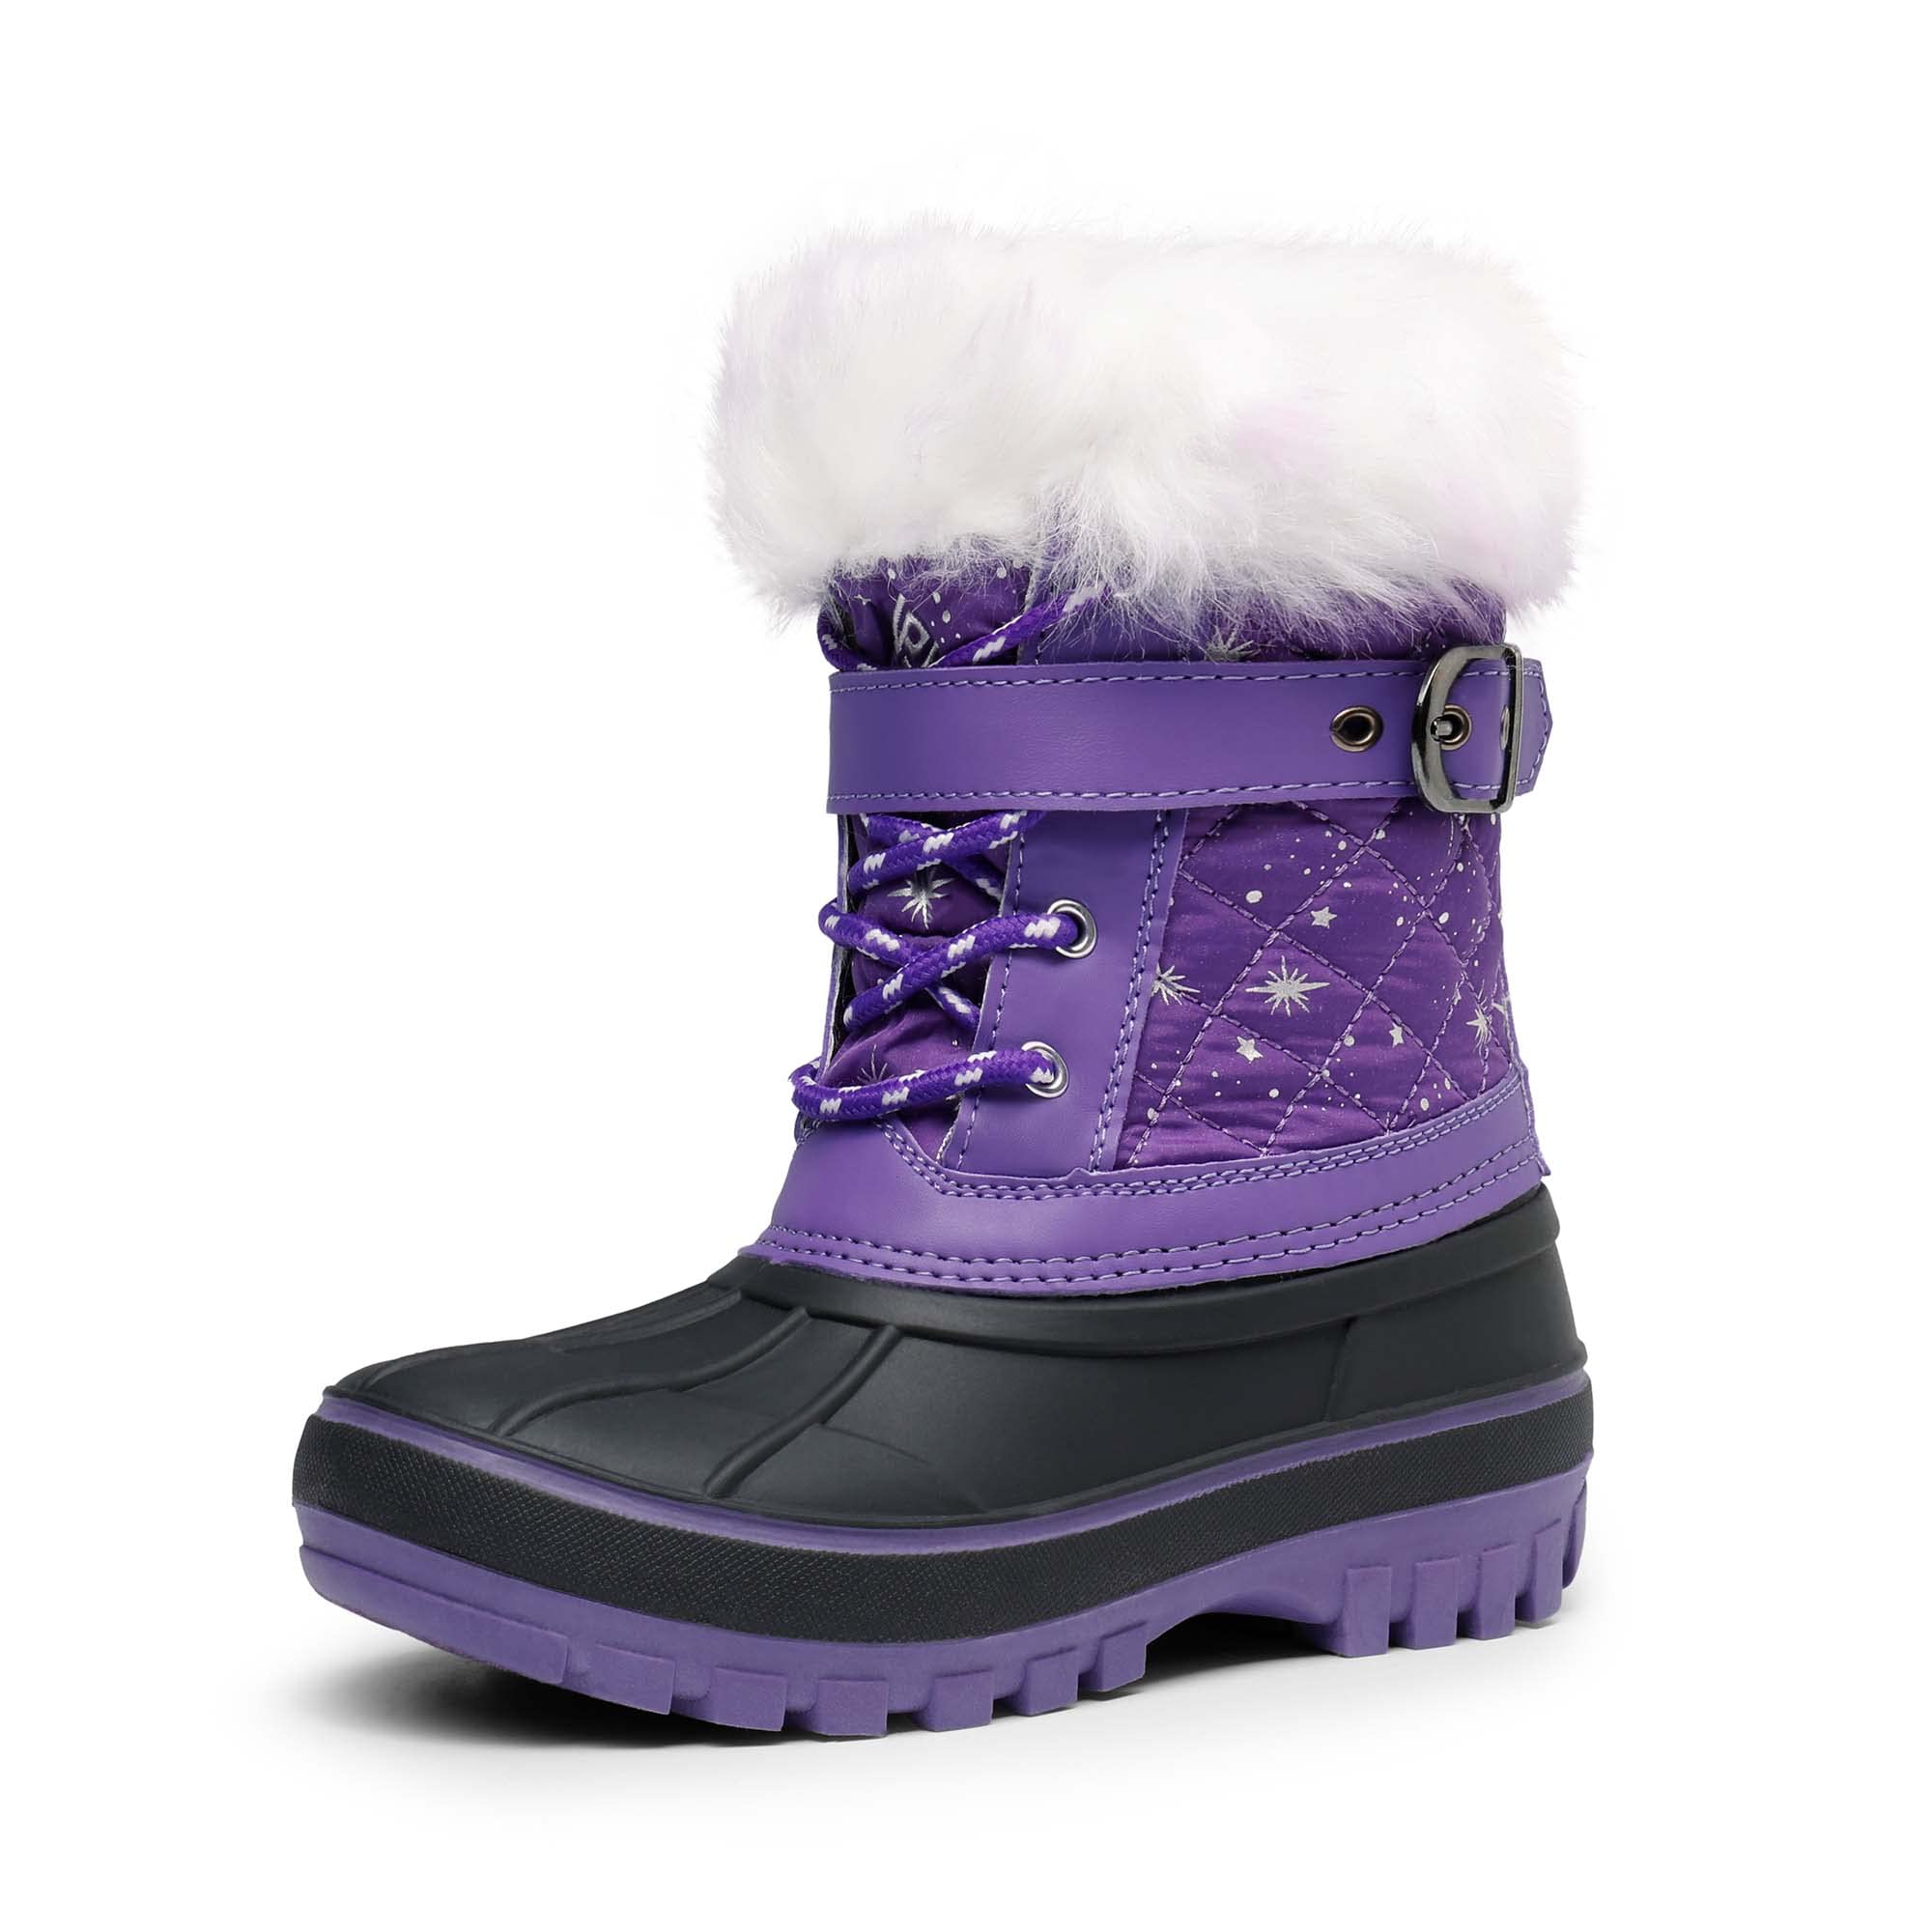 DREAM PAIRS Boys Faux Fur-Lined Insulated Waterproof Winter Snow Boots Kriver-3 Purple 1 Little Kid